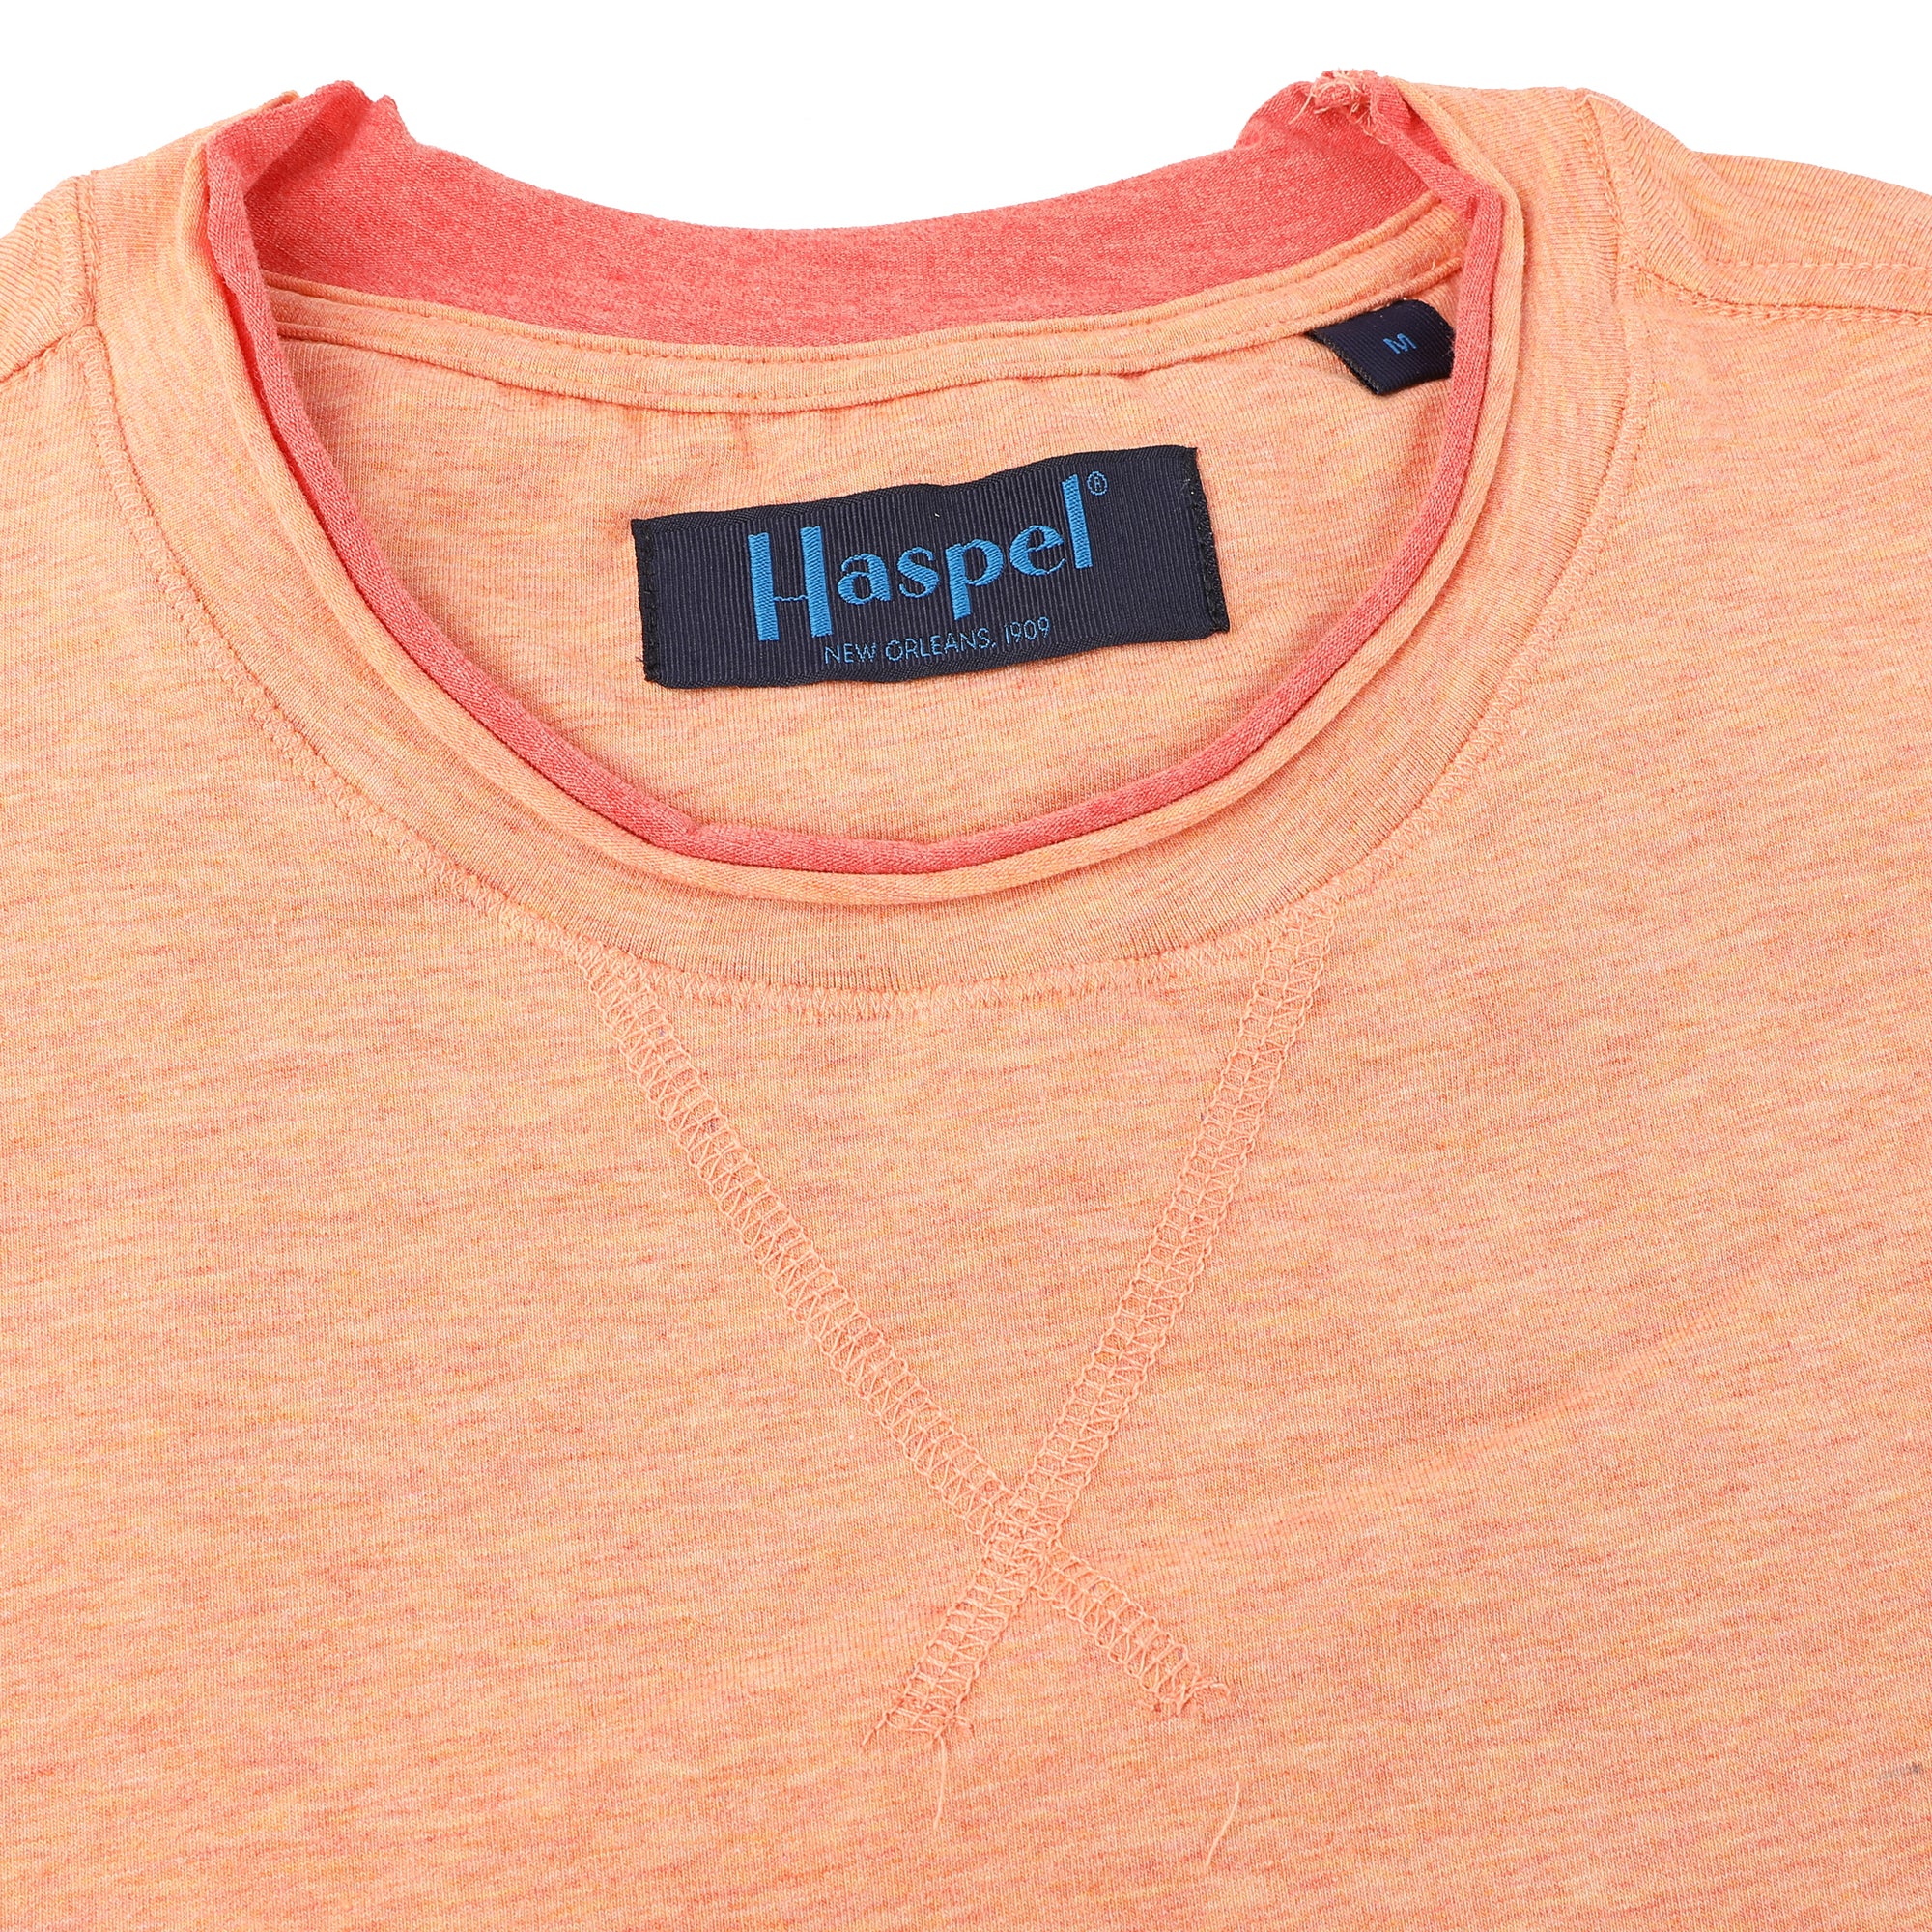 Step out into the warm weather in confidence with the Pompeii Melange Contrast Crew T-Shirt. Crafted from 100% cotton, this peach t-shirt stands out with a sharp orange contrast. Take on the summer with a daring fashion statement and make a statement wherever you go.   100% Luxe Cotton • Relaxed Fit • Contrast Edging • Machine Washable • Imported